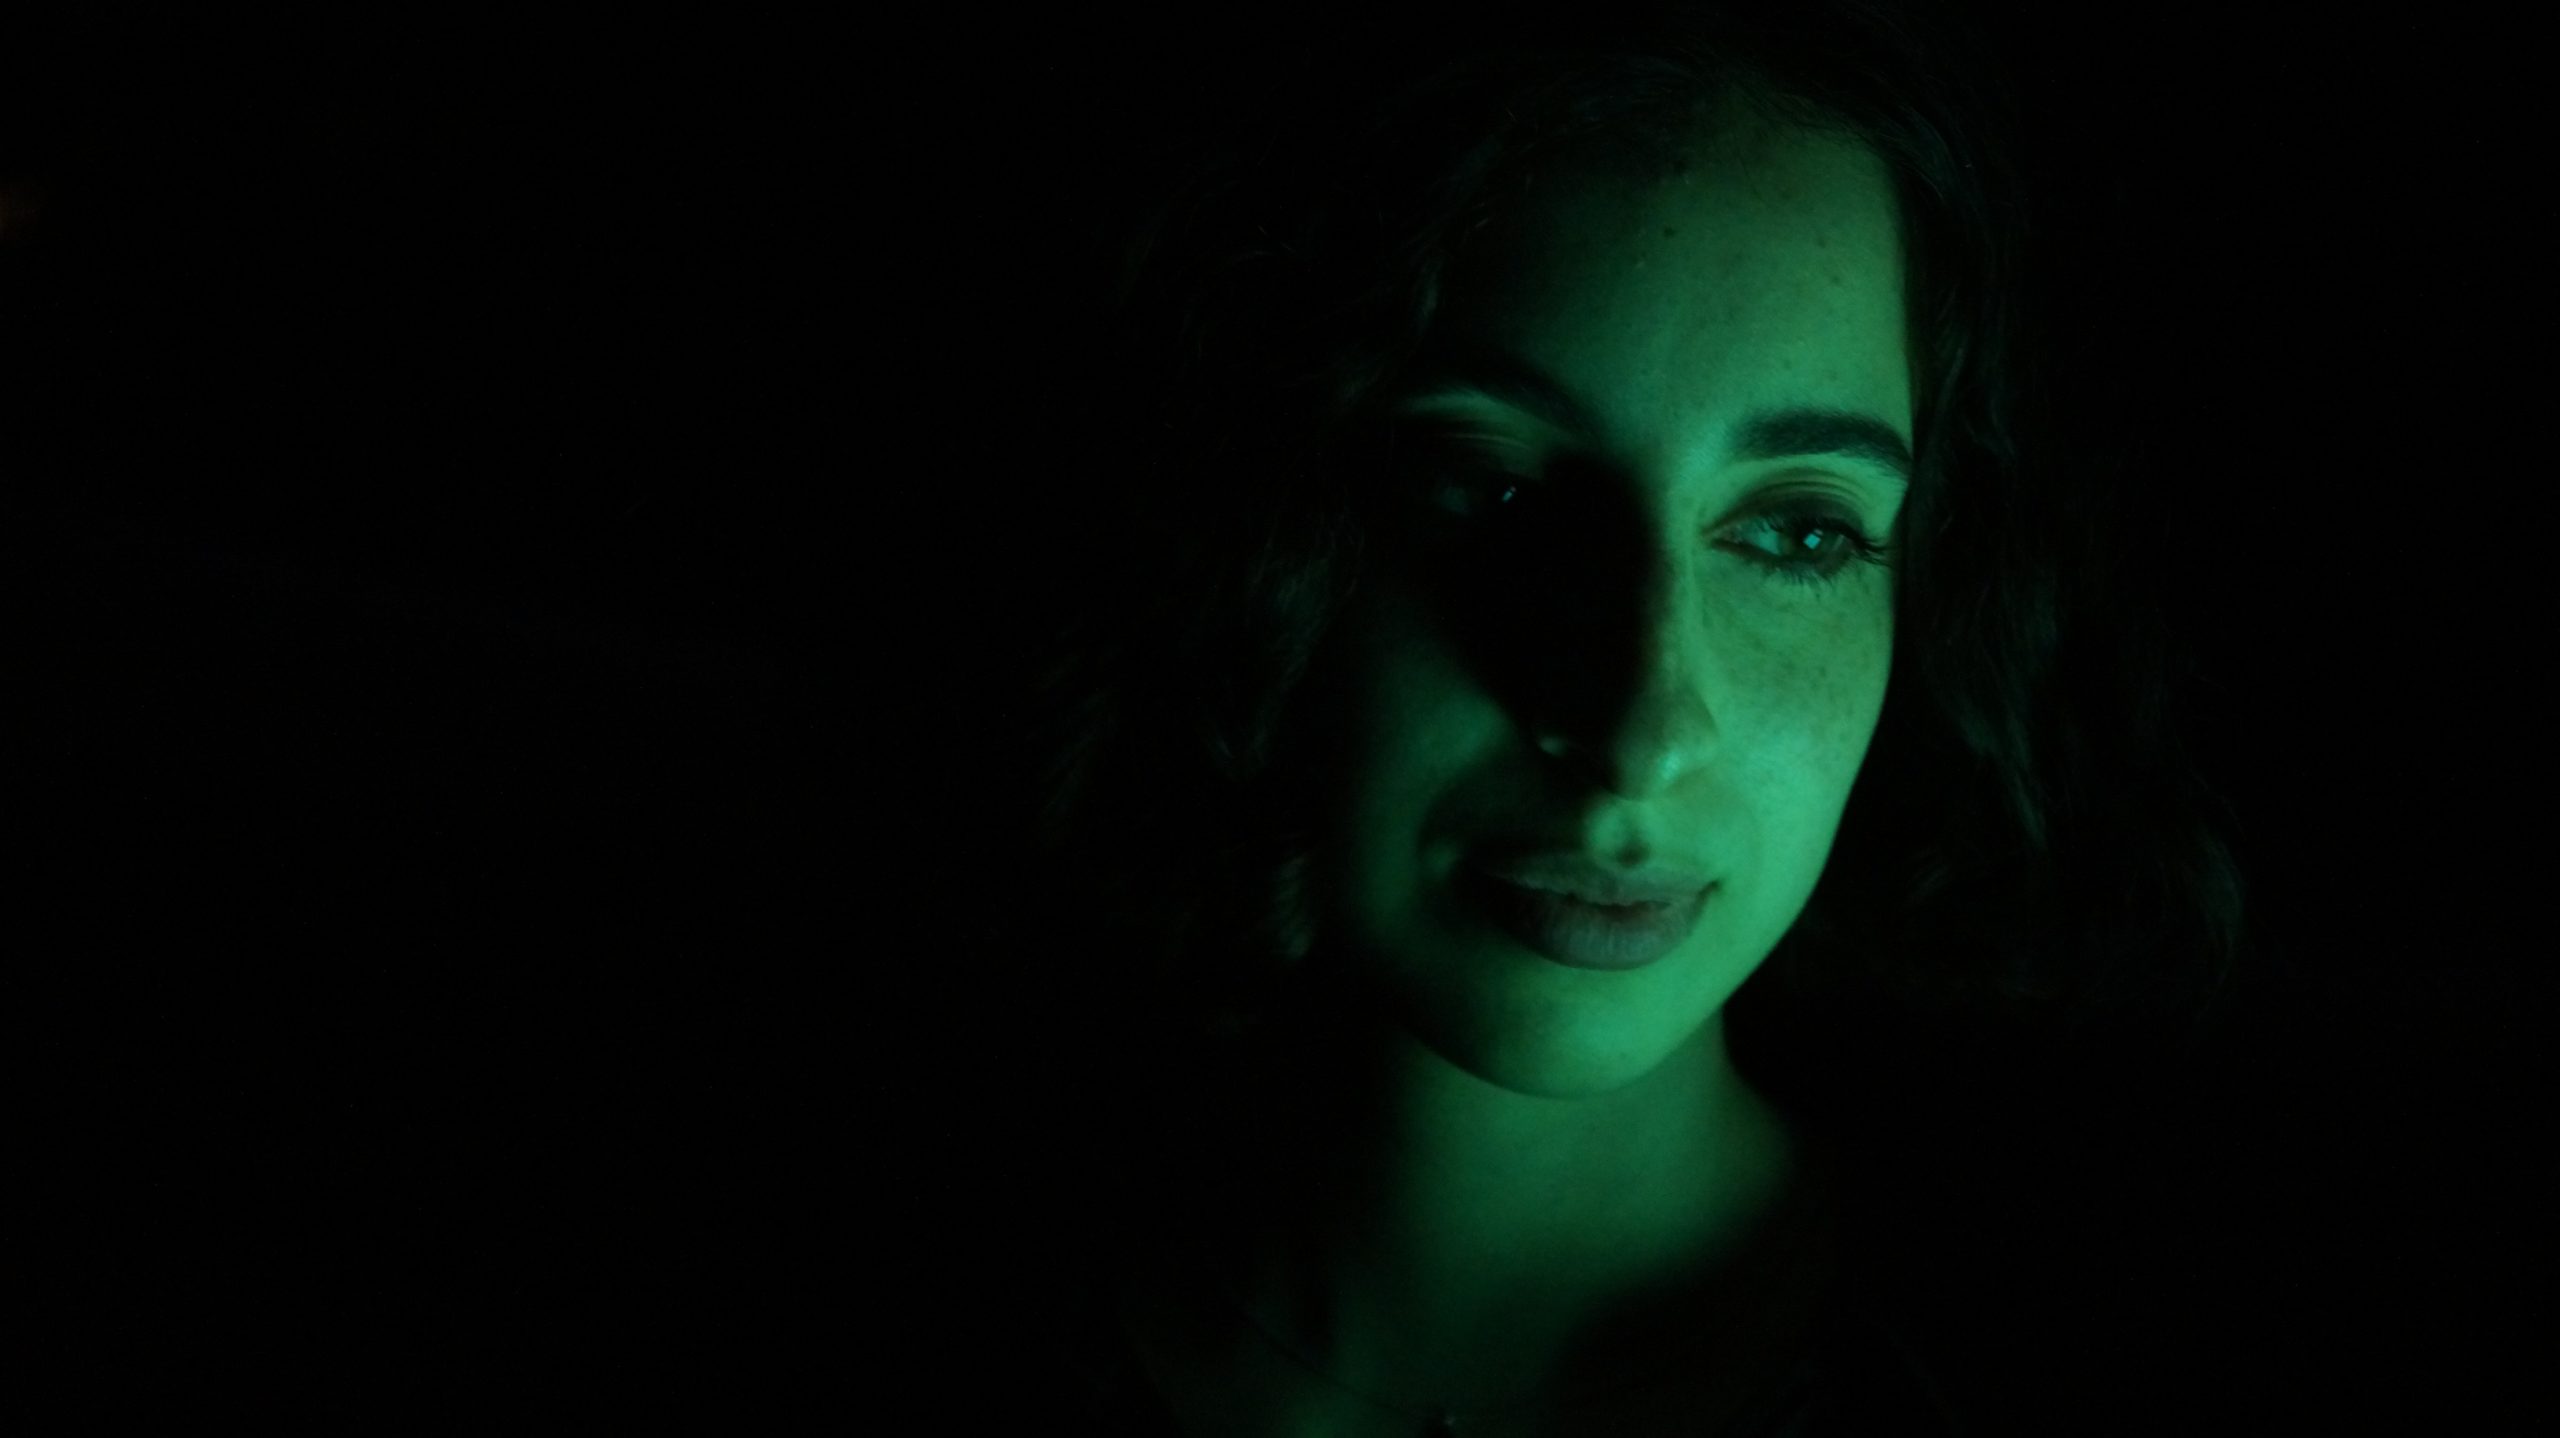 A woman's face lit in green.